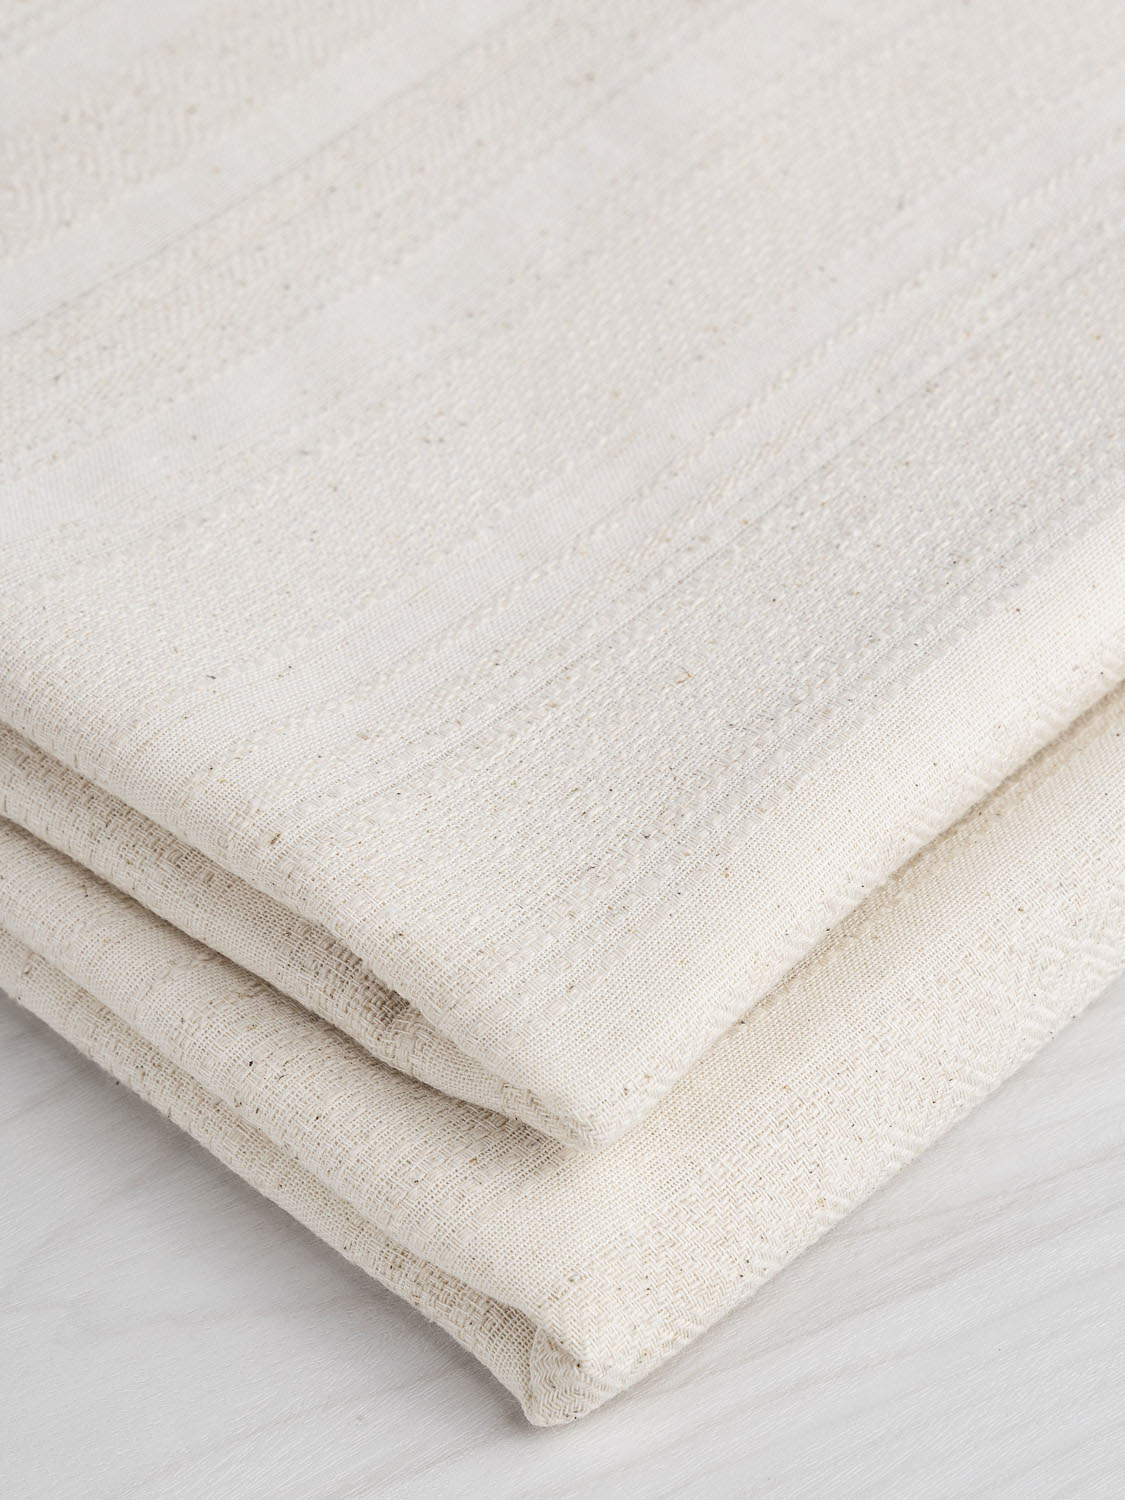 Striped Textured Recycled Cotton - Cloud + Cream | Core Fabrics